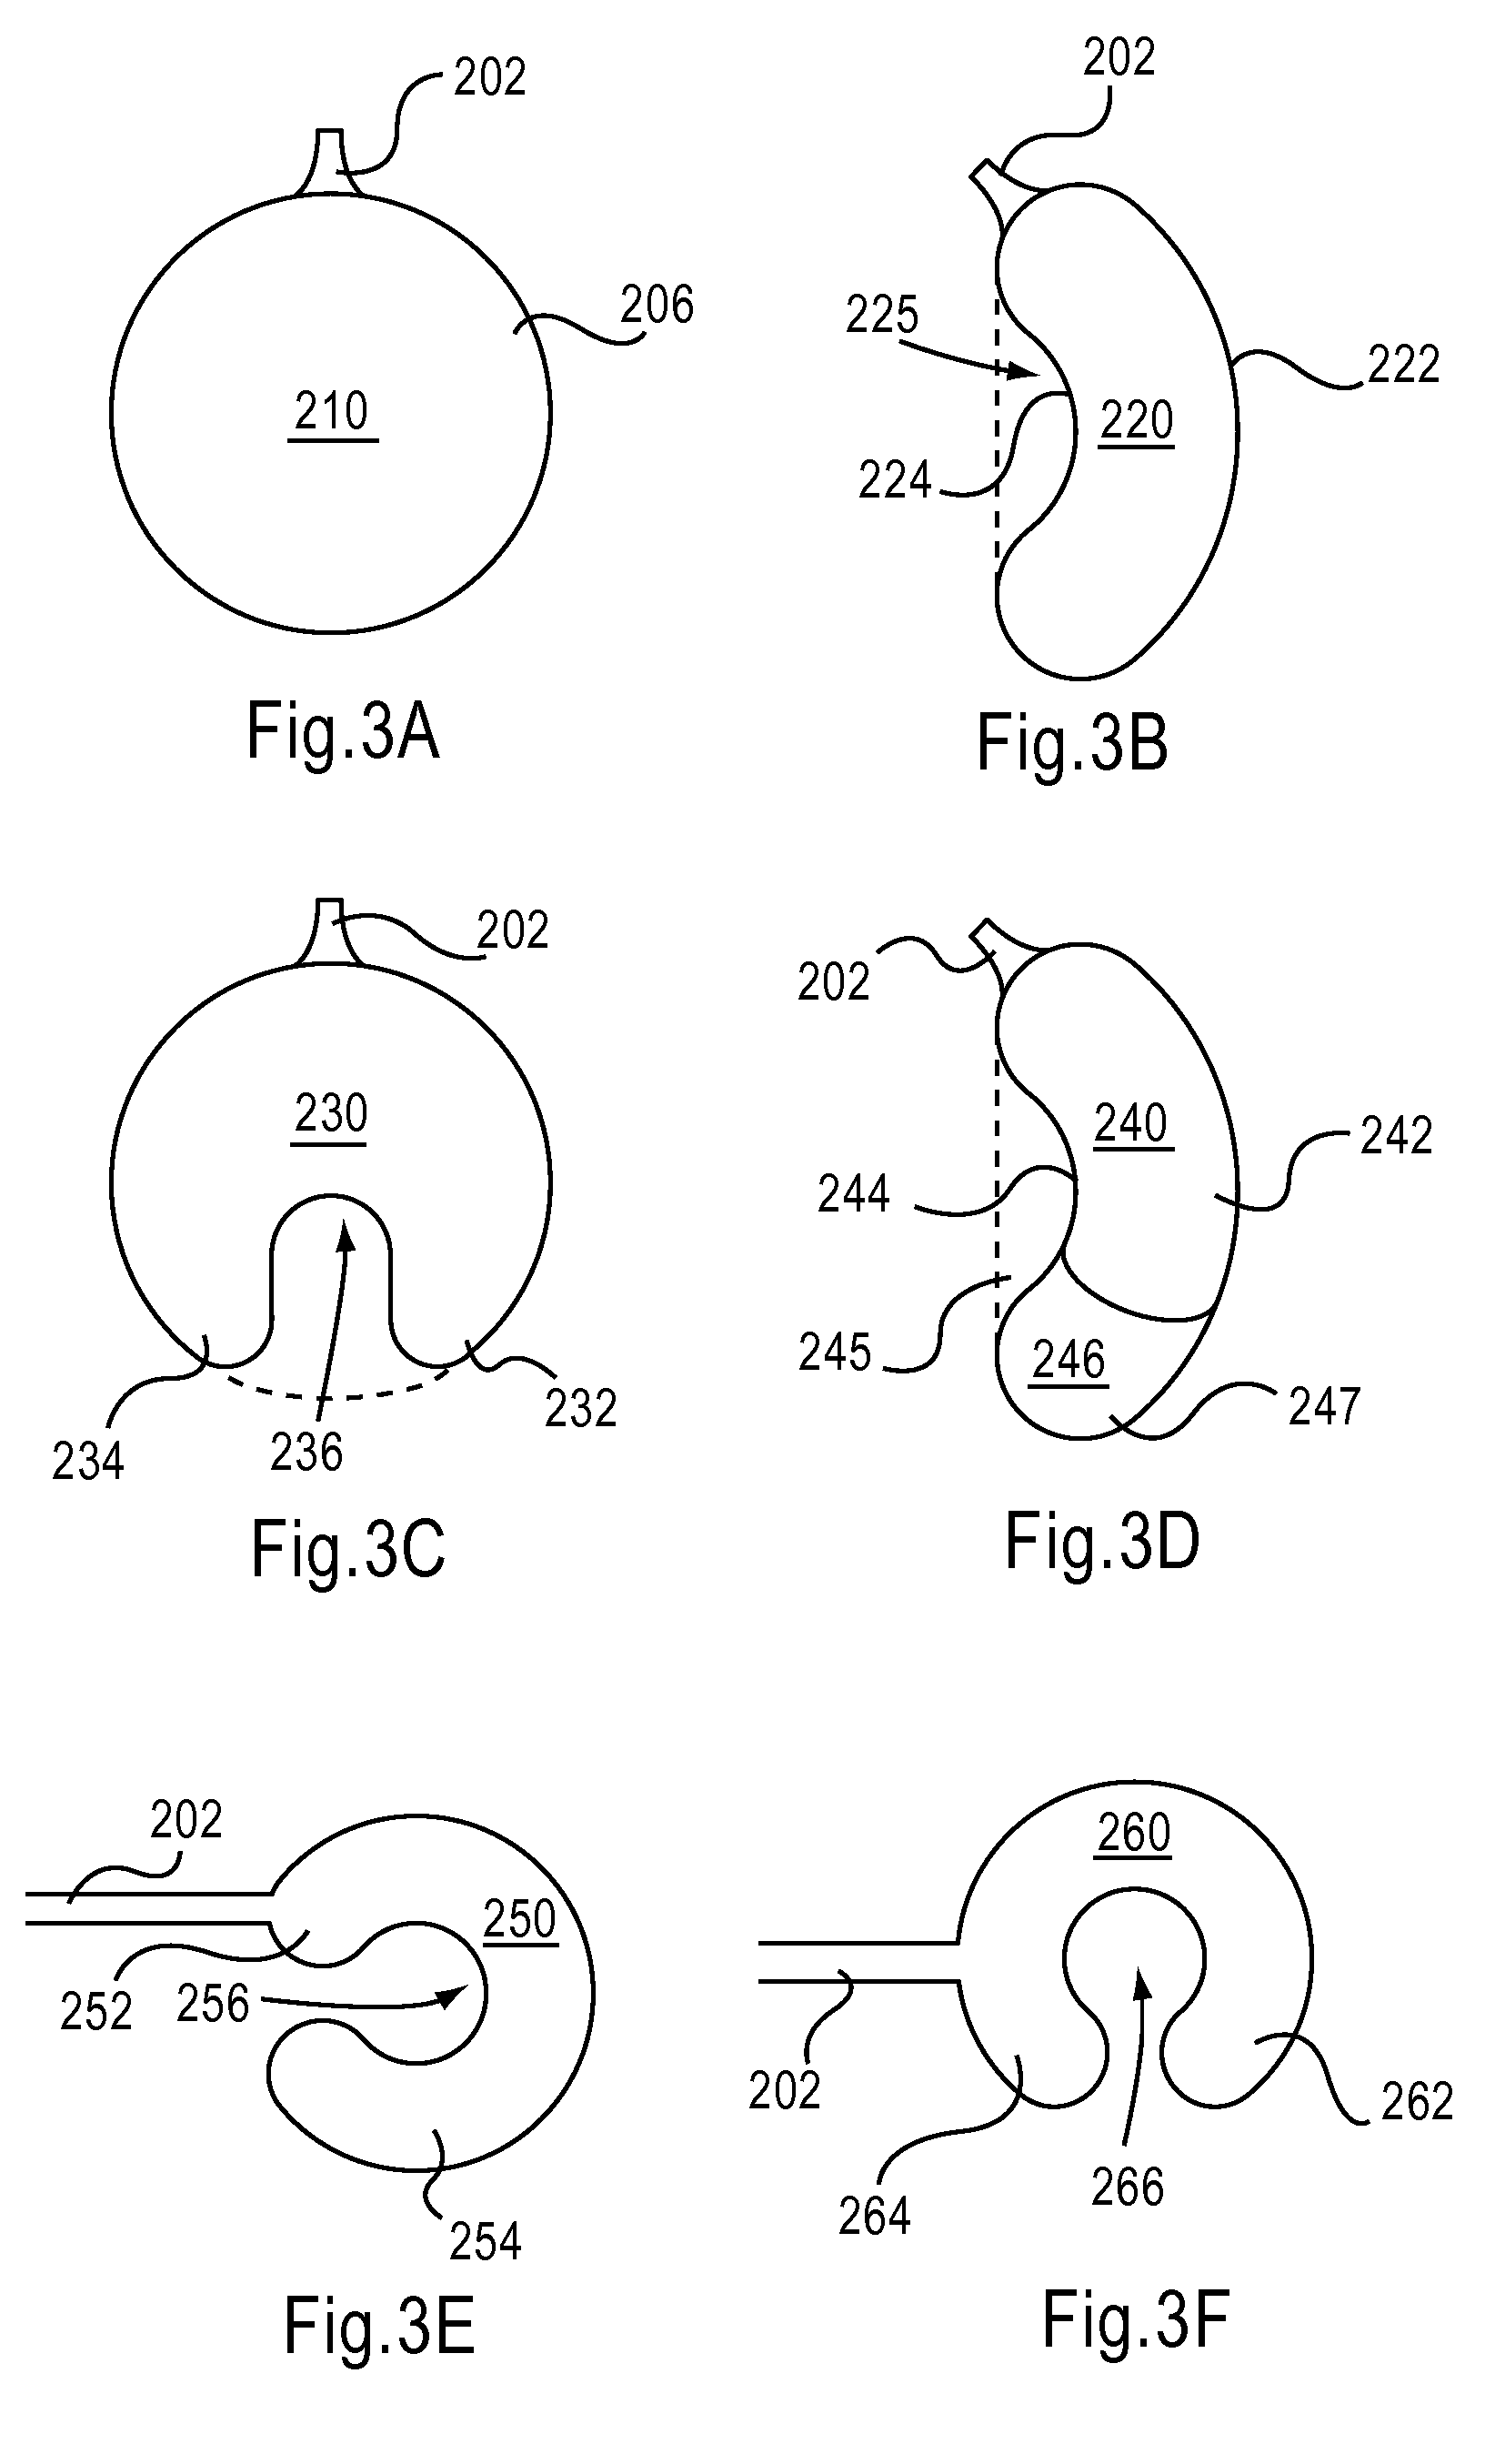 Device and Method for Hip Distention and Access